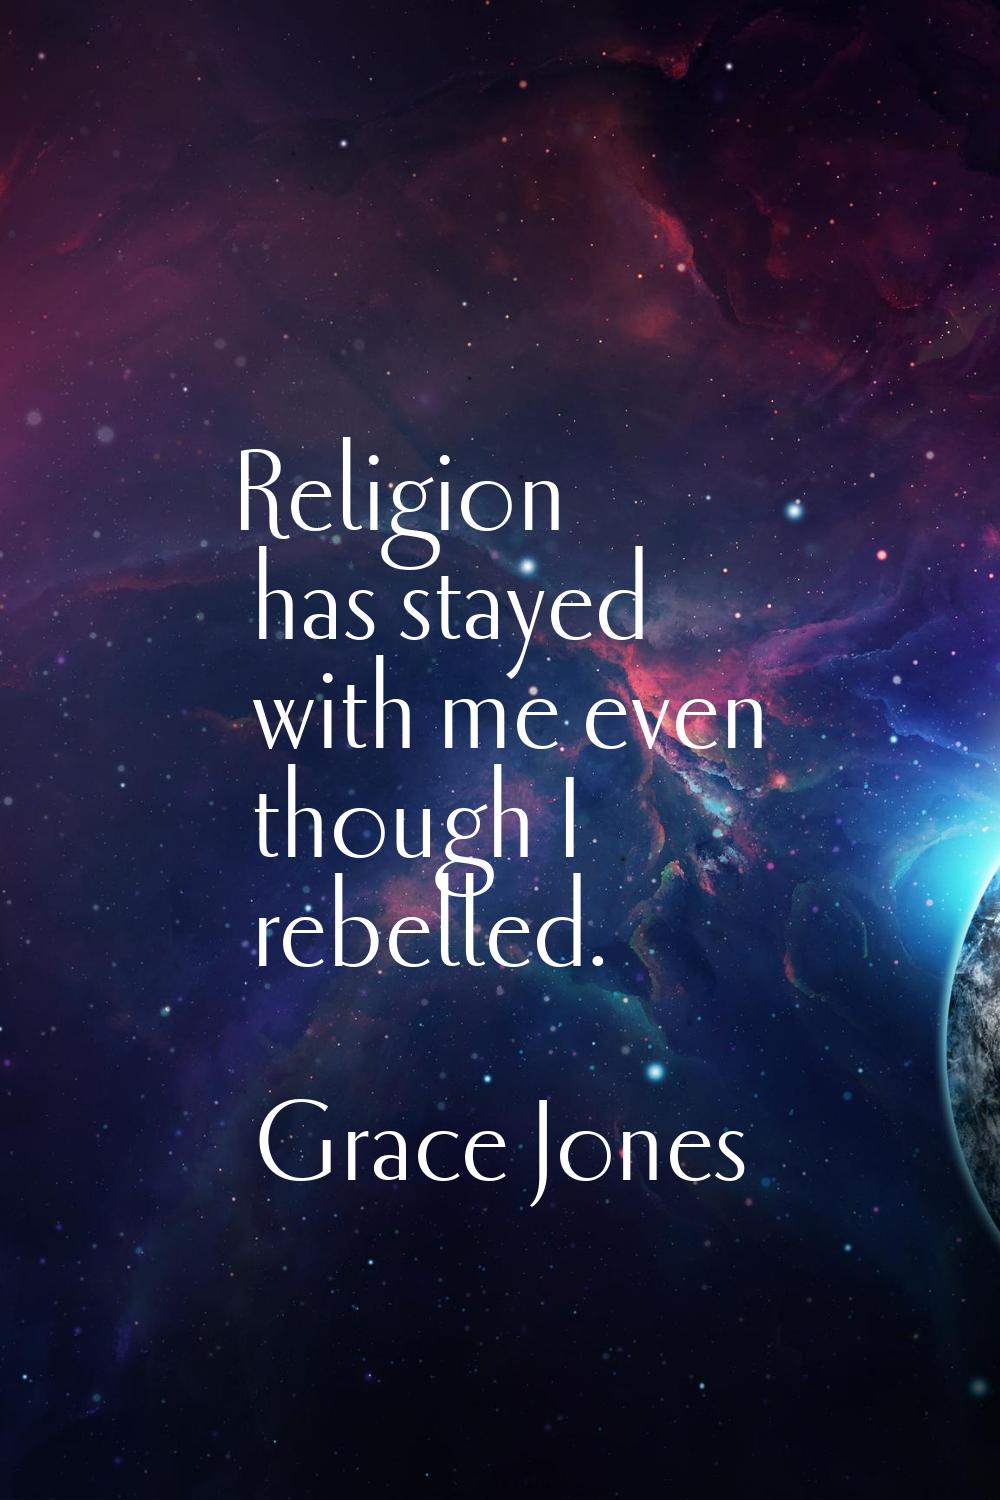 Religion has stayed with me even though I rebelled.